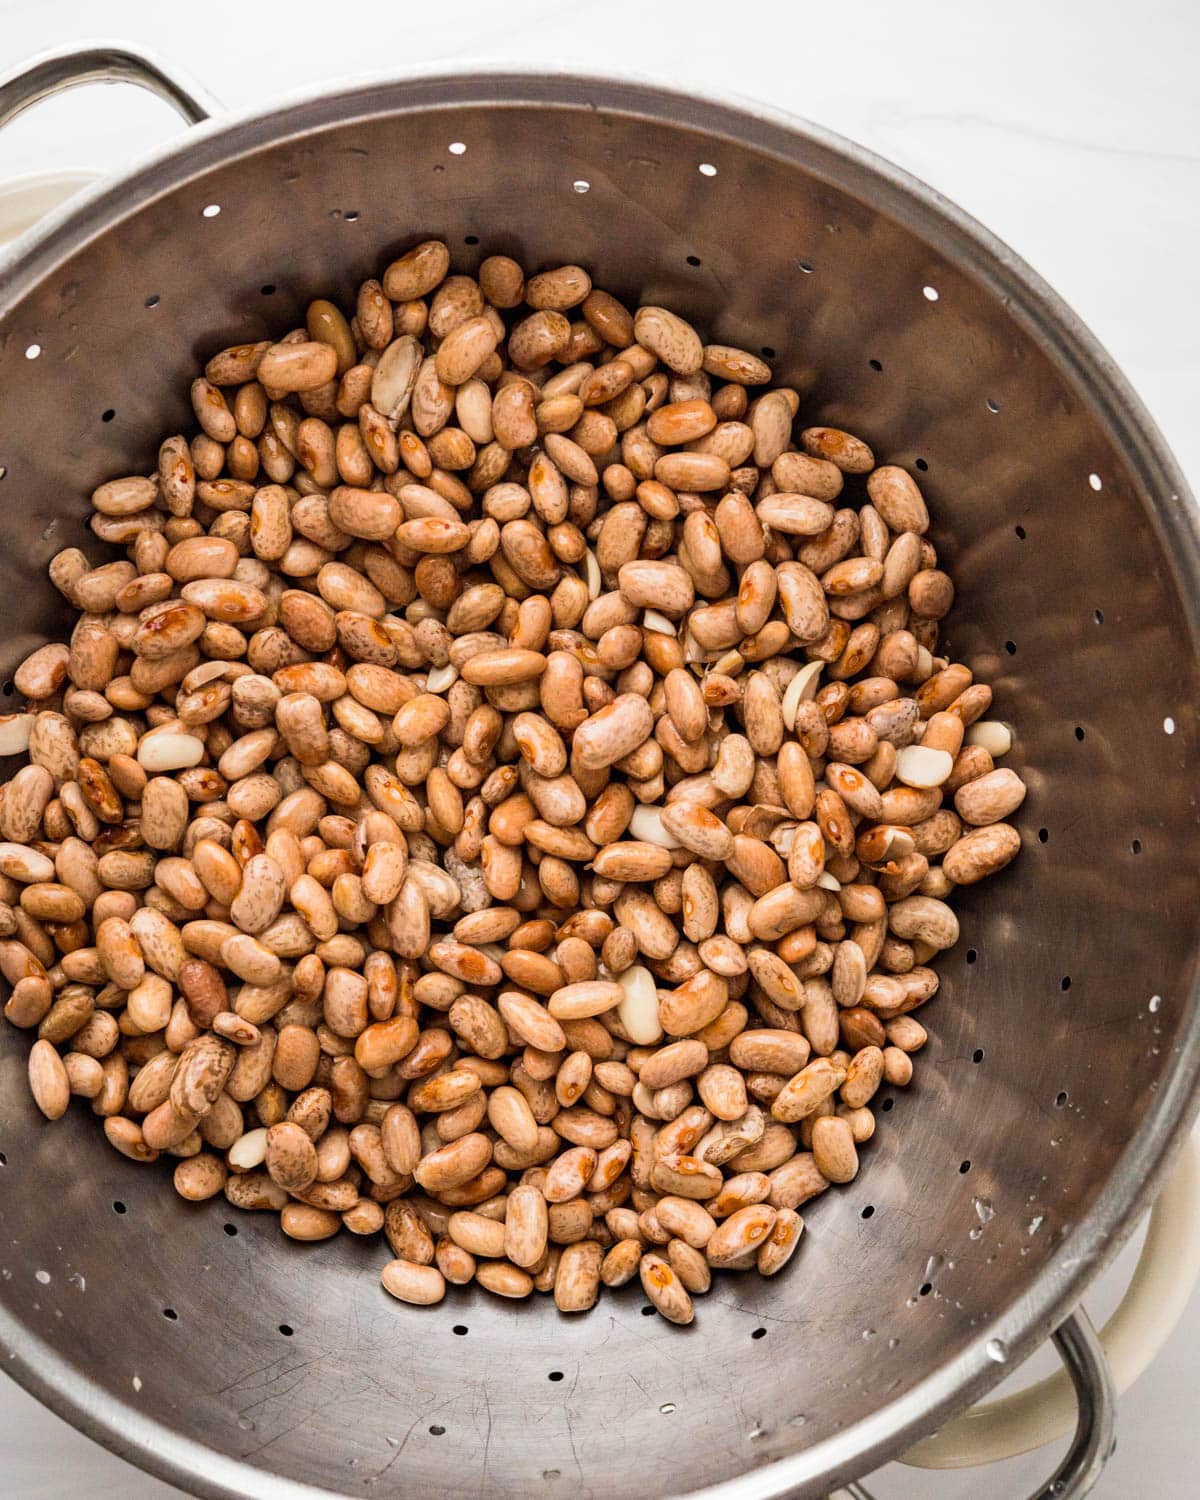 rinse and drain the soaked beans in a colander.